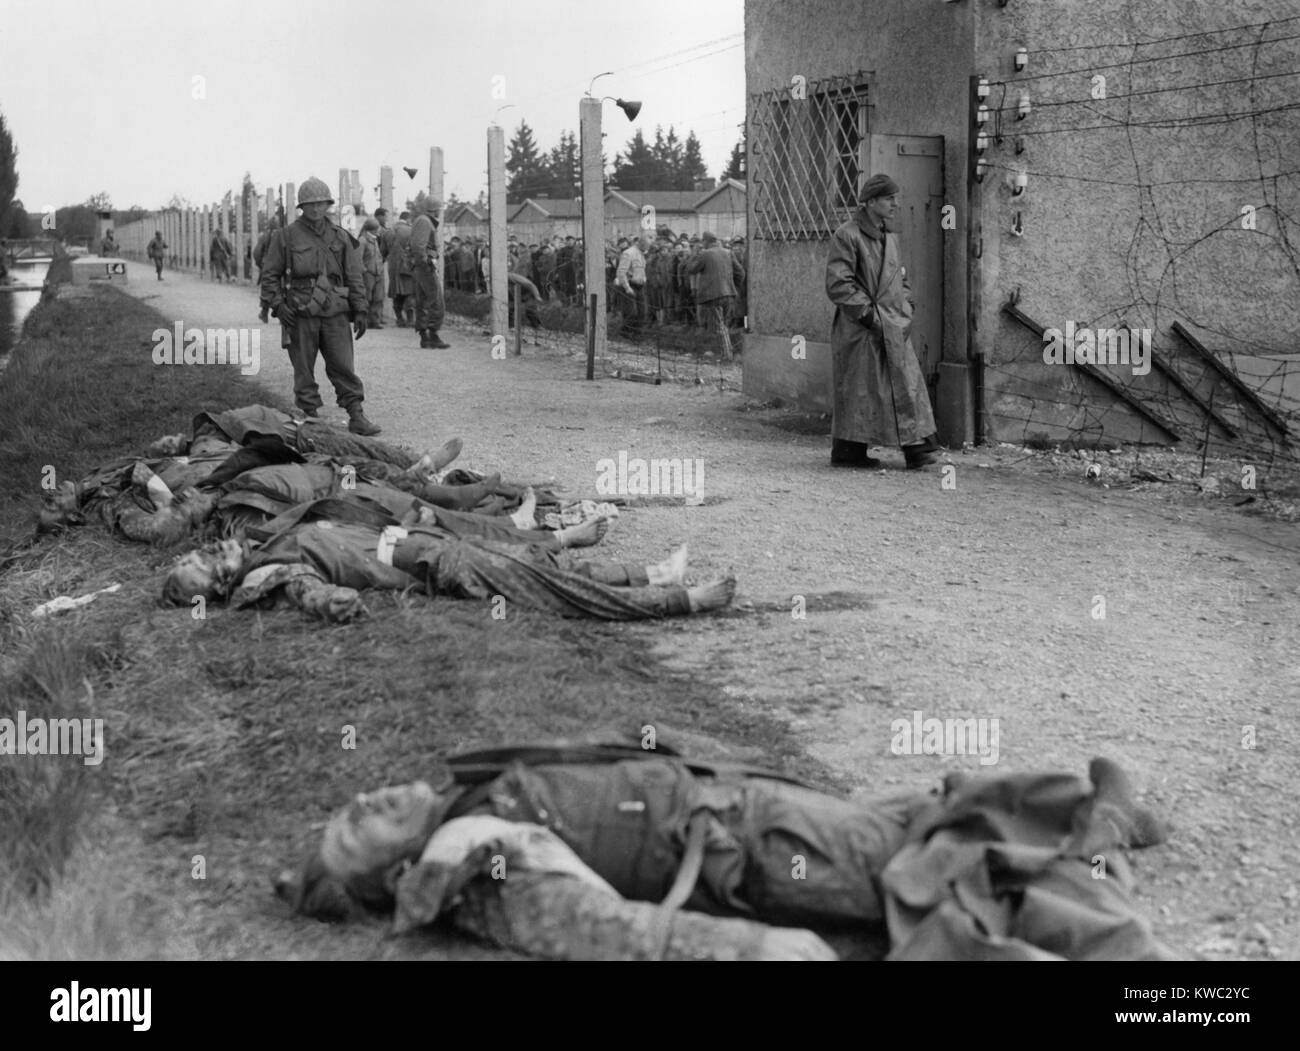 Bodies of former SS guards lie on the bank of a moat surrounding the Dachau Concentration Camp. Liberated prisoner's killed the guards by beating them to death. Seventh US Army soldiers patrolled the area and checked liberated prisoners in the barbed wire enclosure. April 29, 1945, World War 2 (BSLOC 2015 13 15) Stock Photo